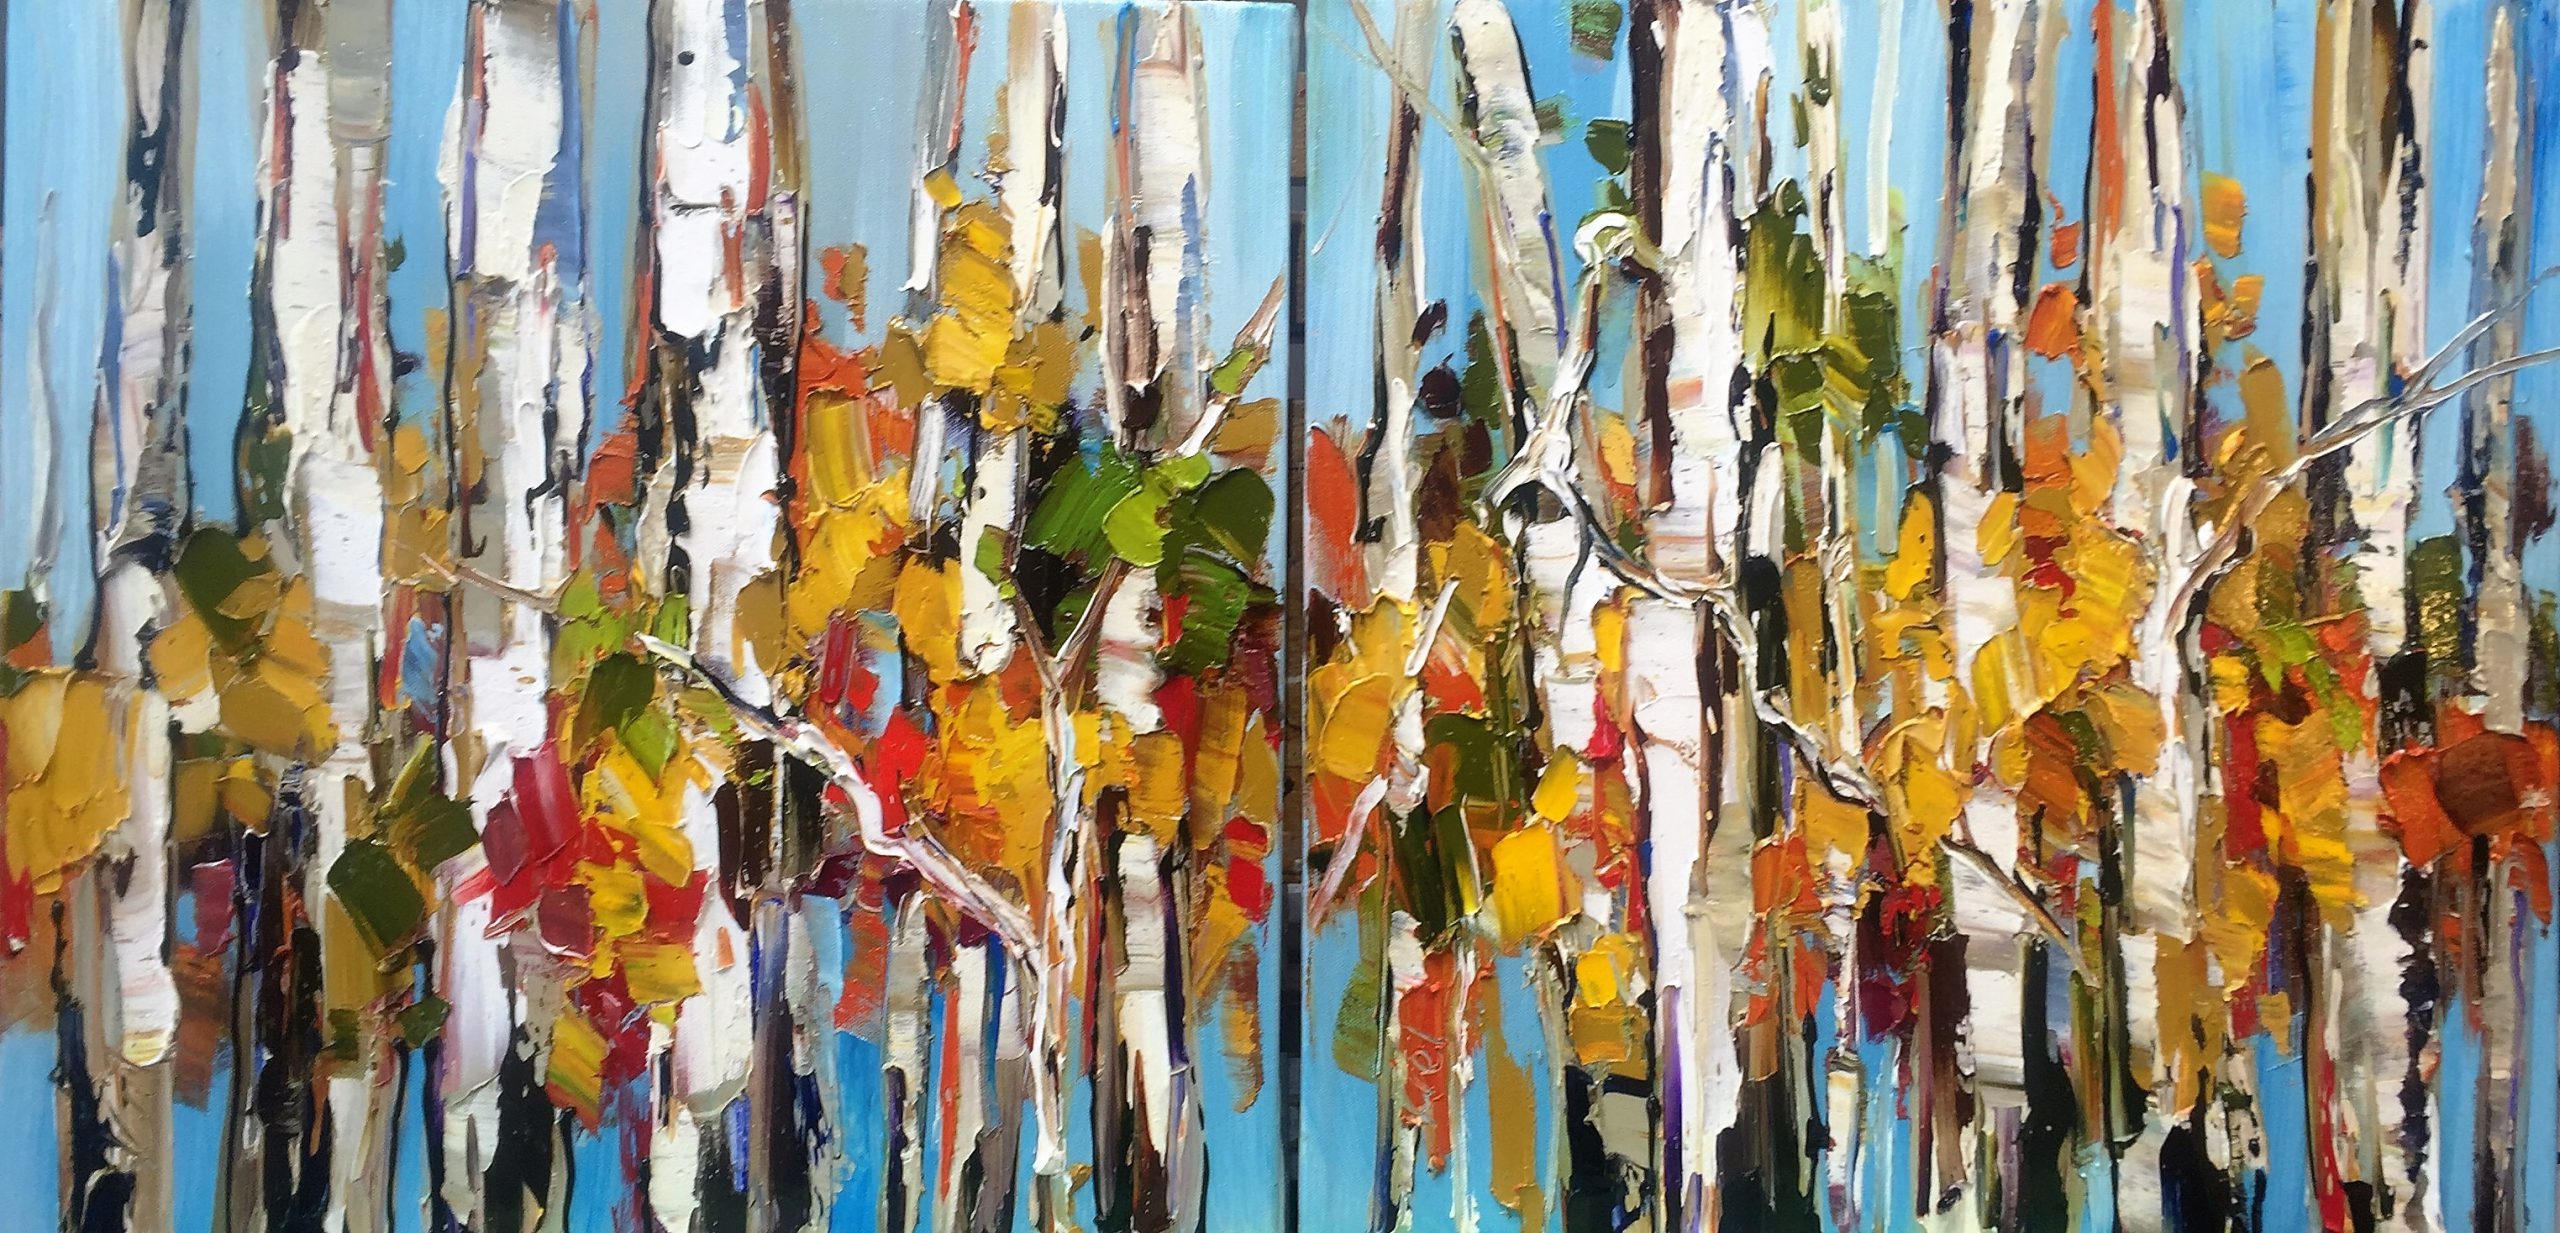 Calling for Sunny Times, birch tree painting by Kimberly Kiel | Effusion Art Gallery + Cast Glass Studio, Invermere BC